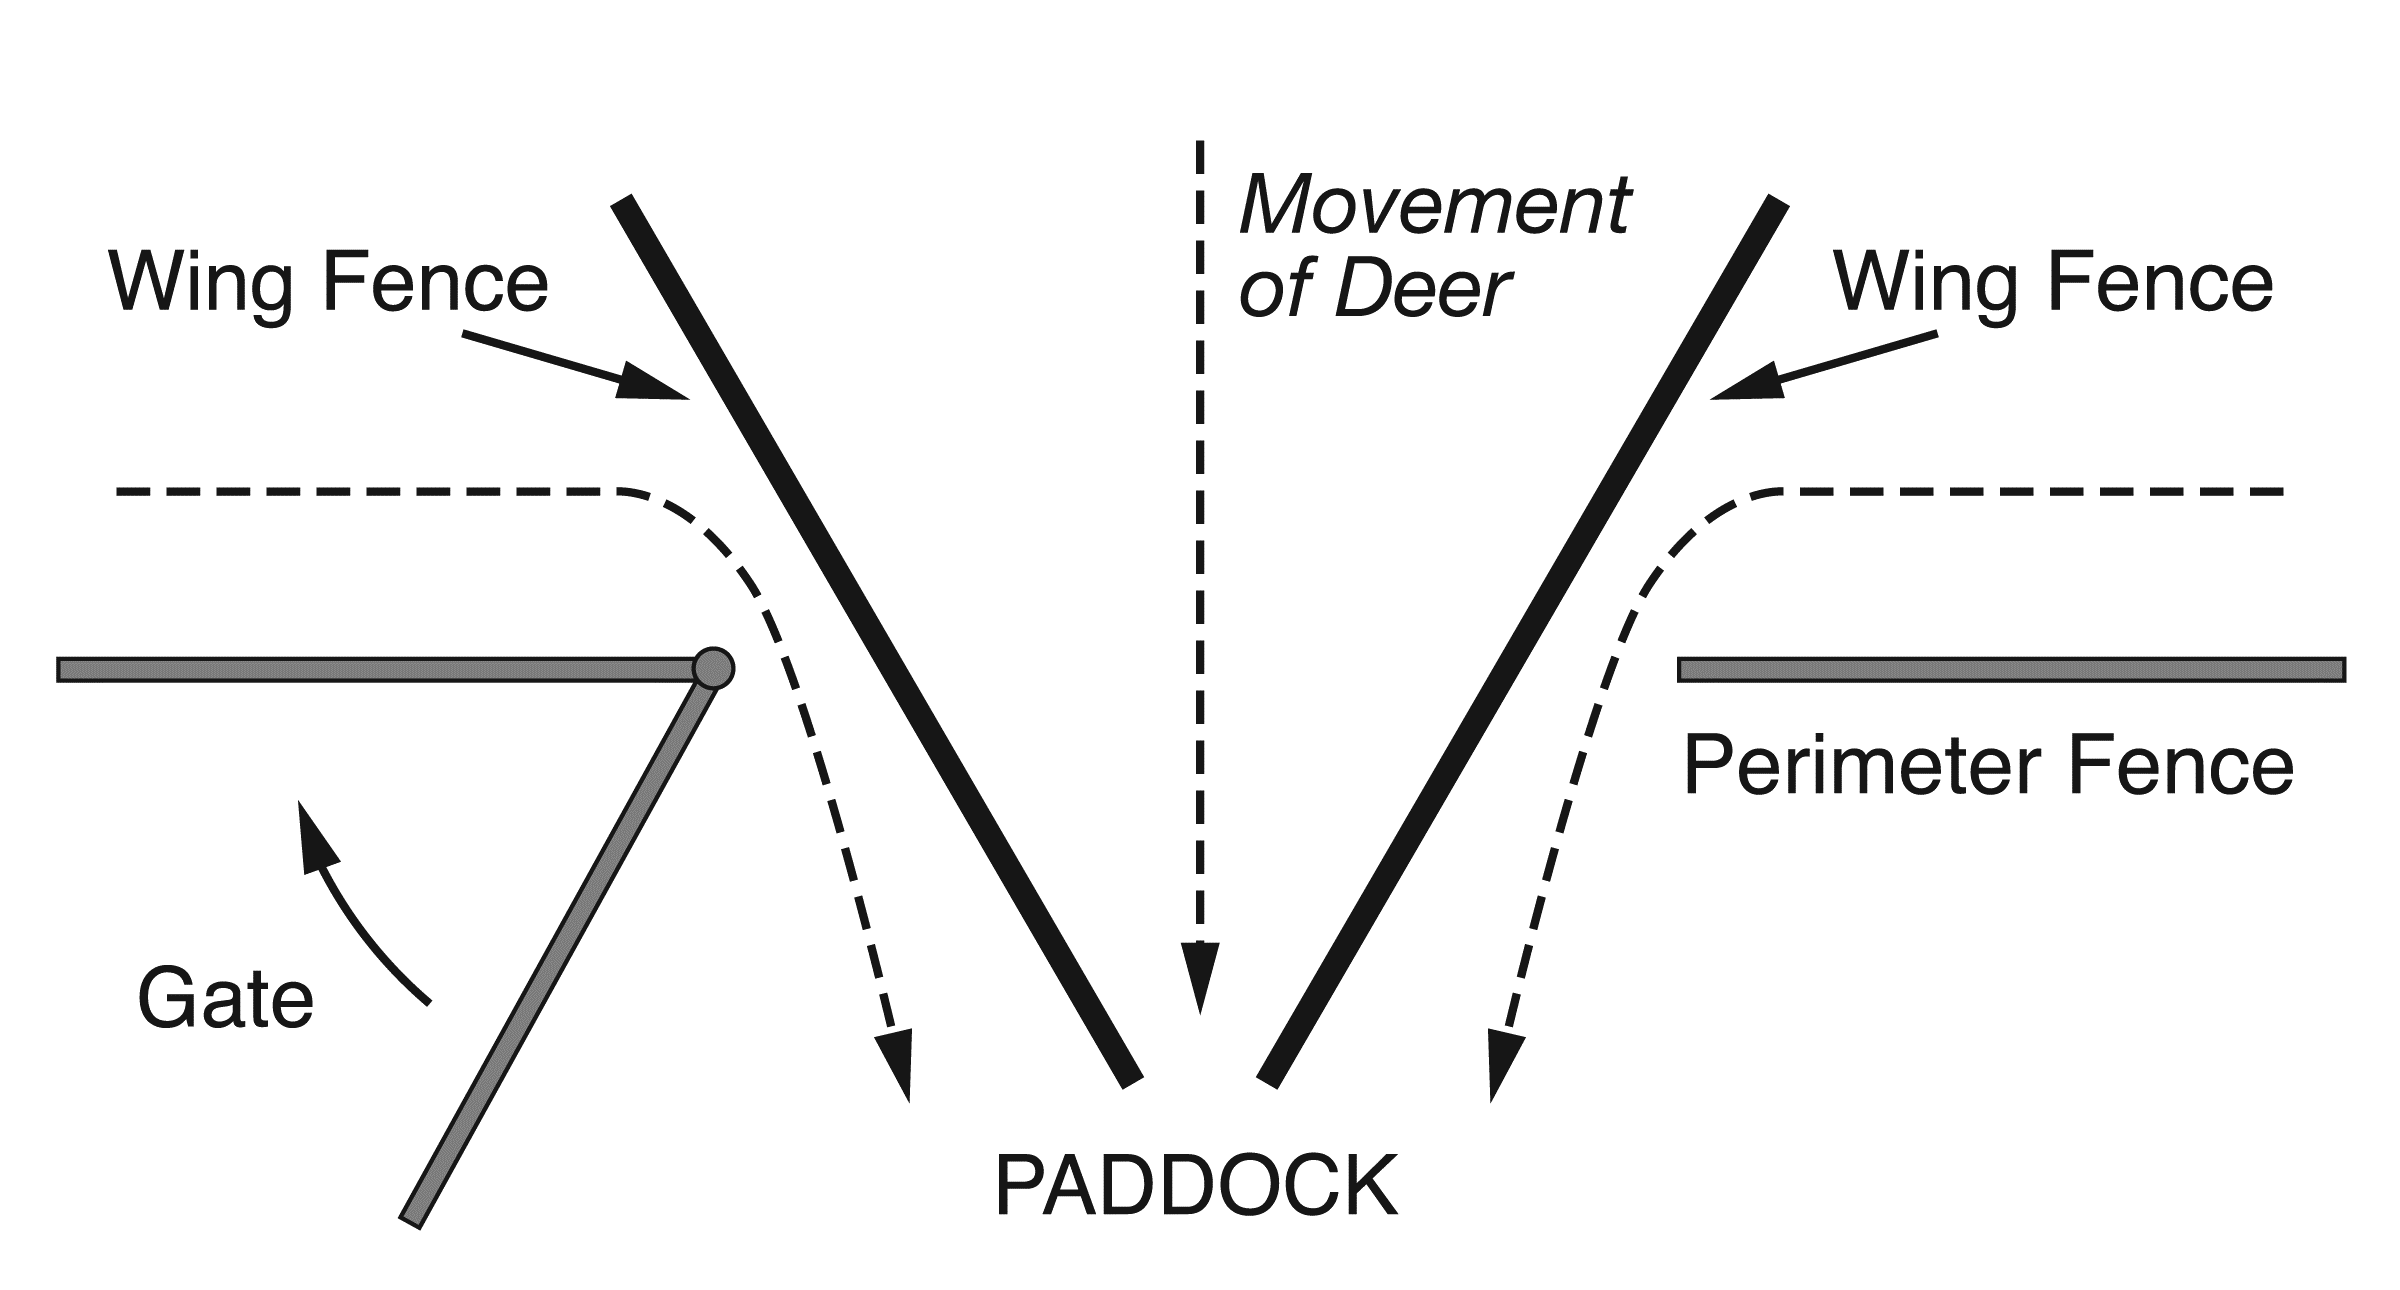 A drawing of wing fences well inside the opeing of the perimeter fence to avoid the problem of deer escaping when entering.